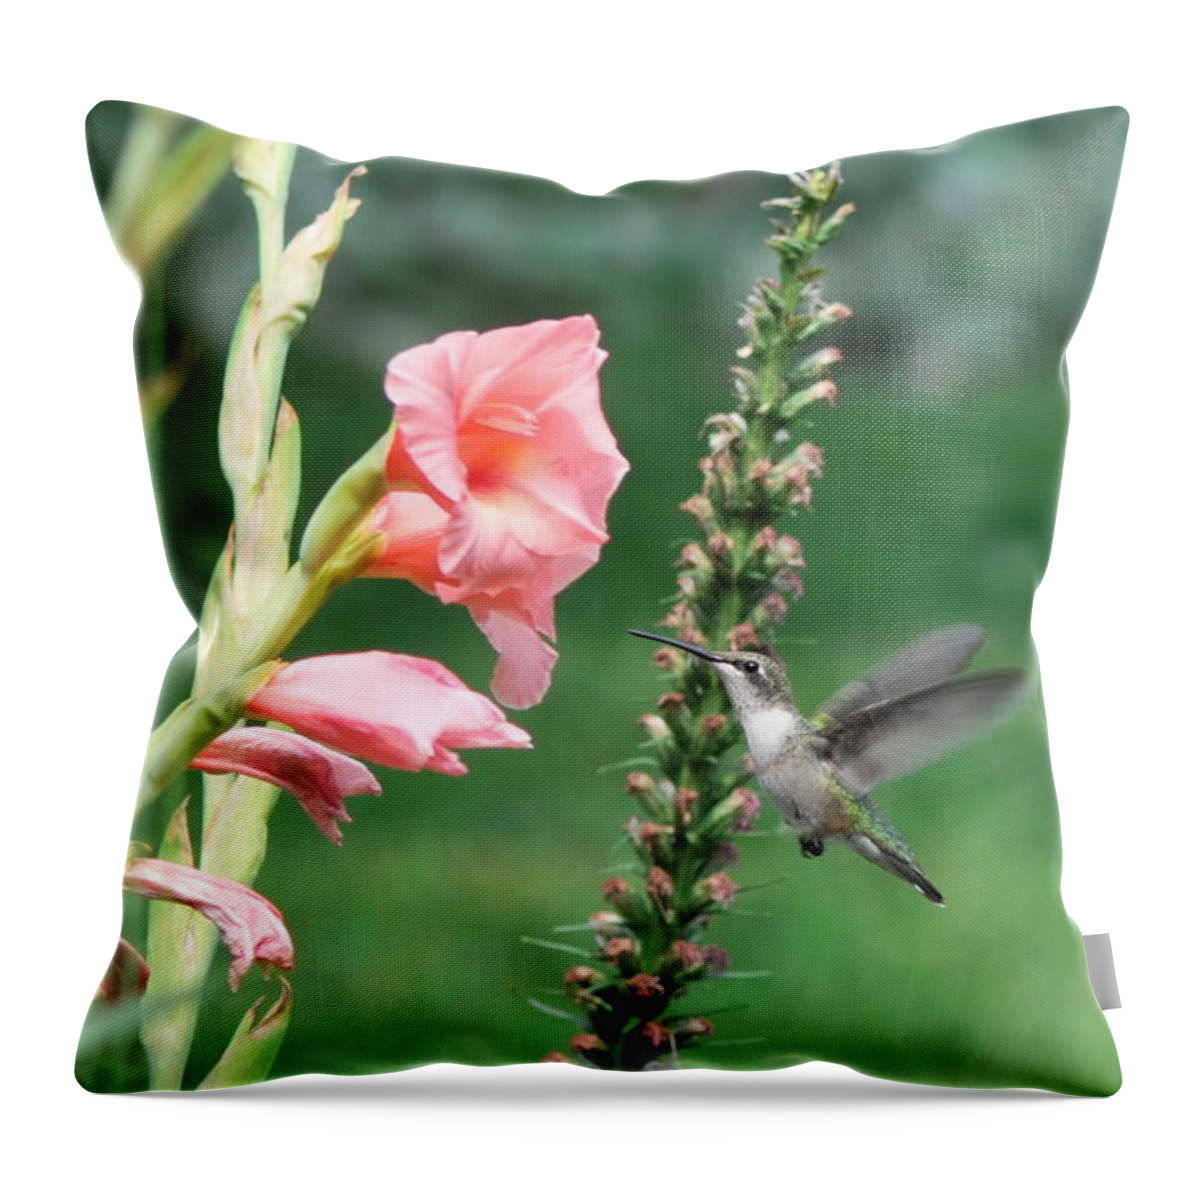 Hummingbird Throw Pillow featuring the photograph Flying Still by Michelle DiGuardi